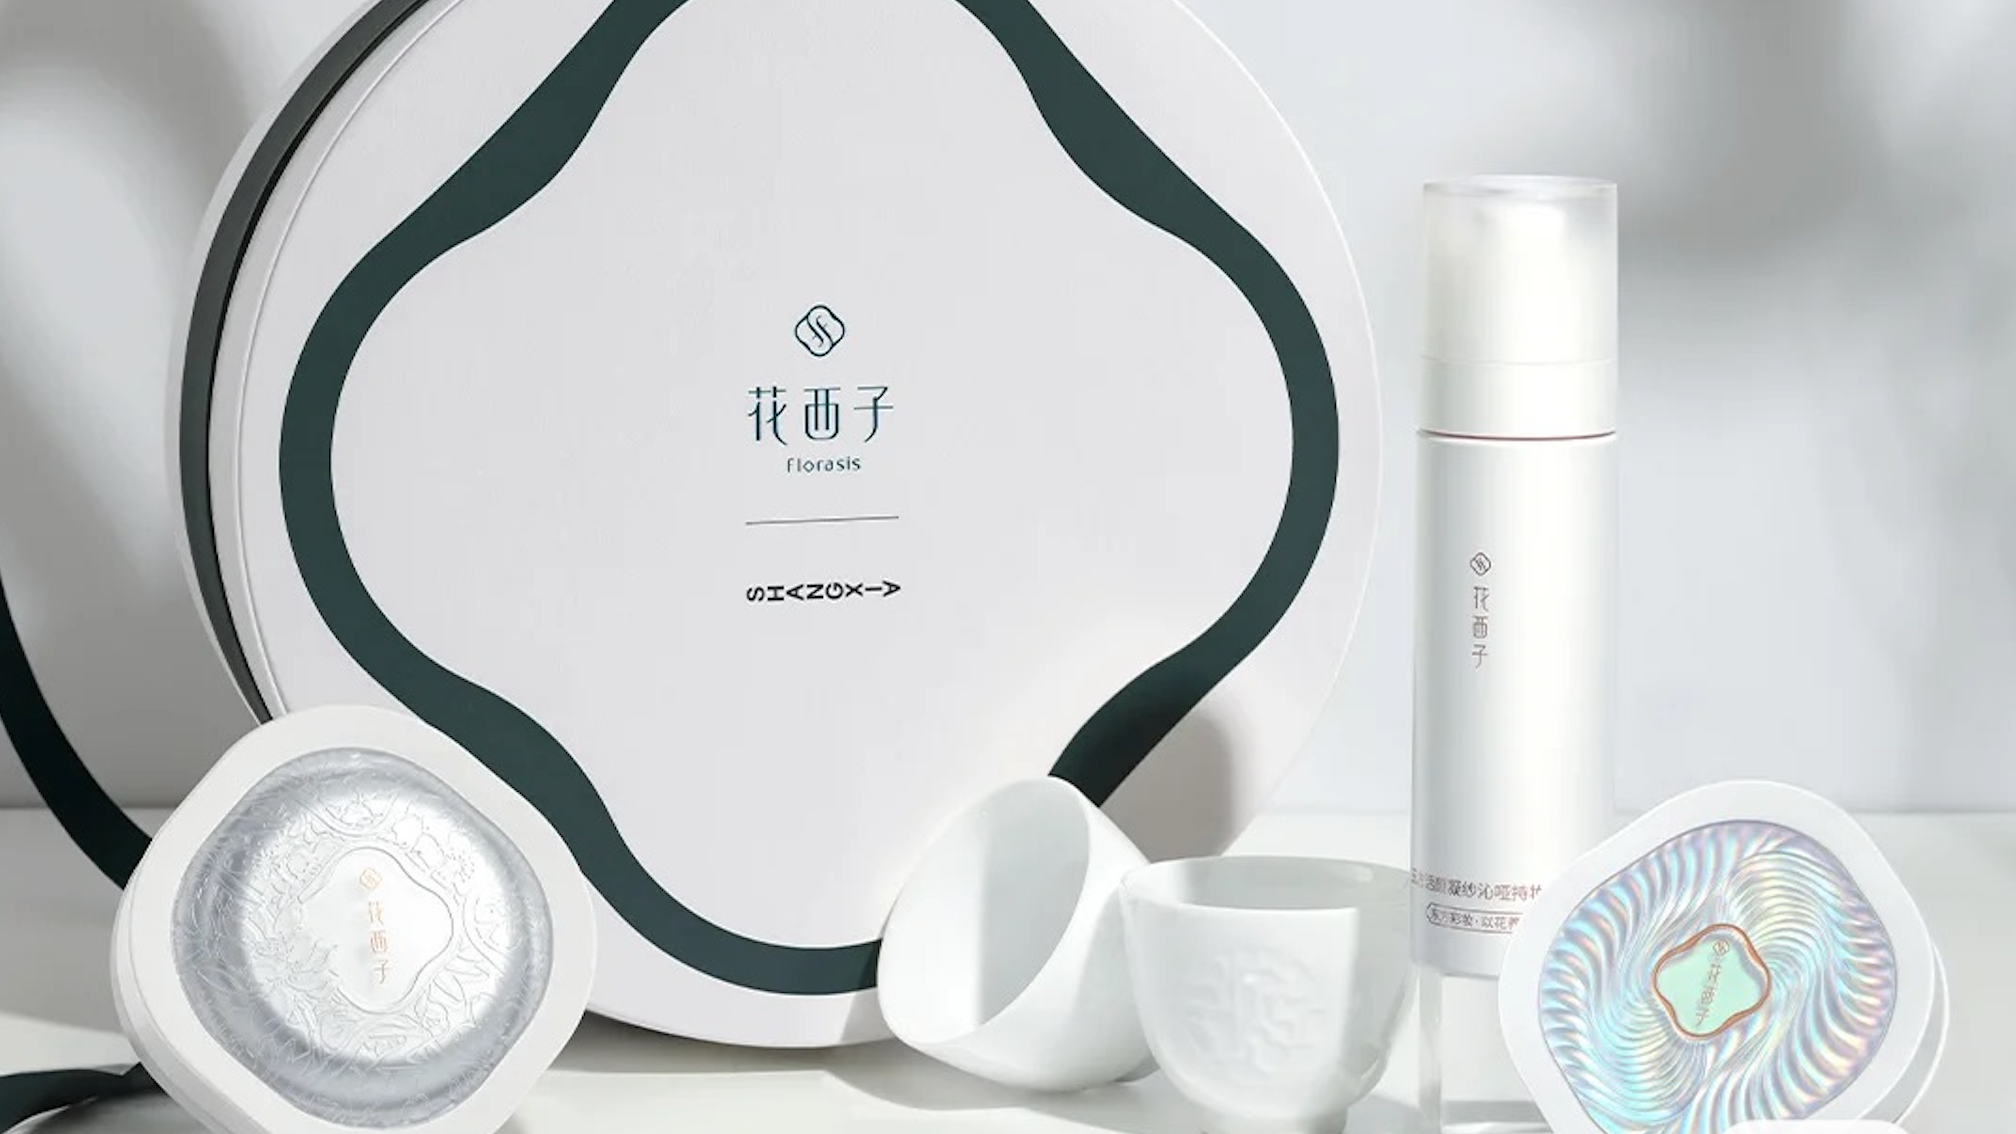 Designer home brand Shang Xia taps local beauty Florasis to reach a wider, younger audience, while Florasis aims to premiumize its image by collaborating with the lifestyle brand. Photo: Florasis Xiaohongshu 